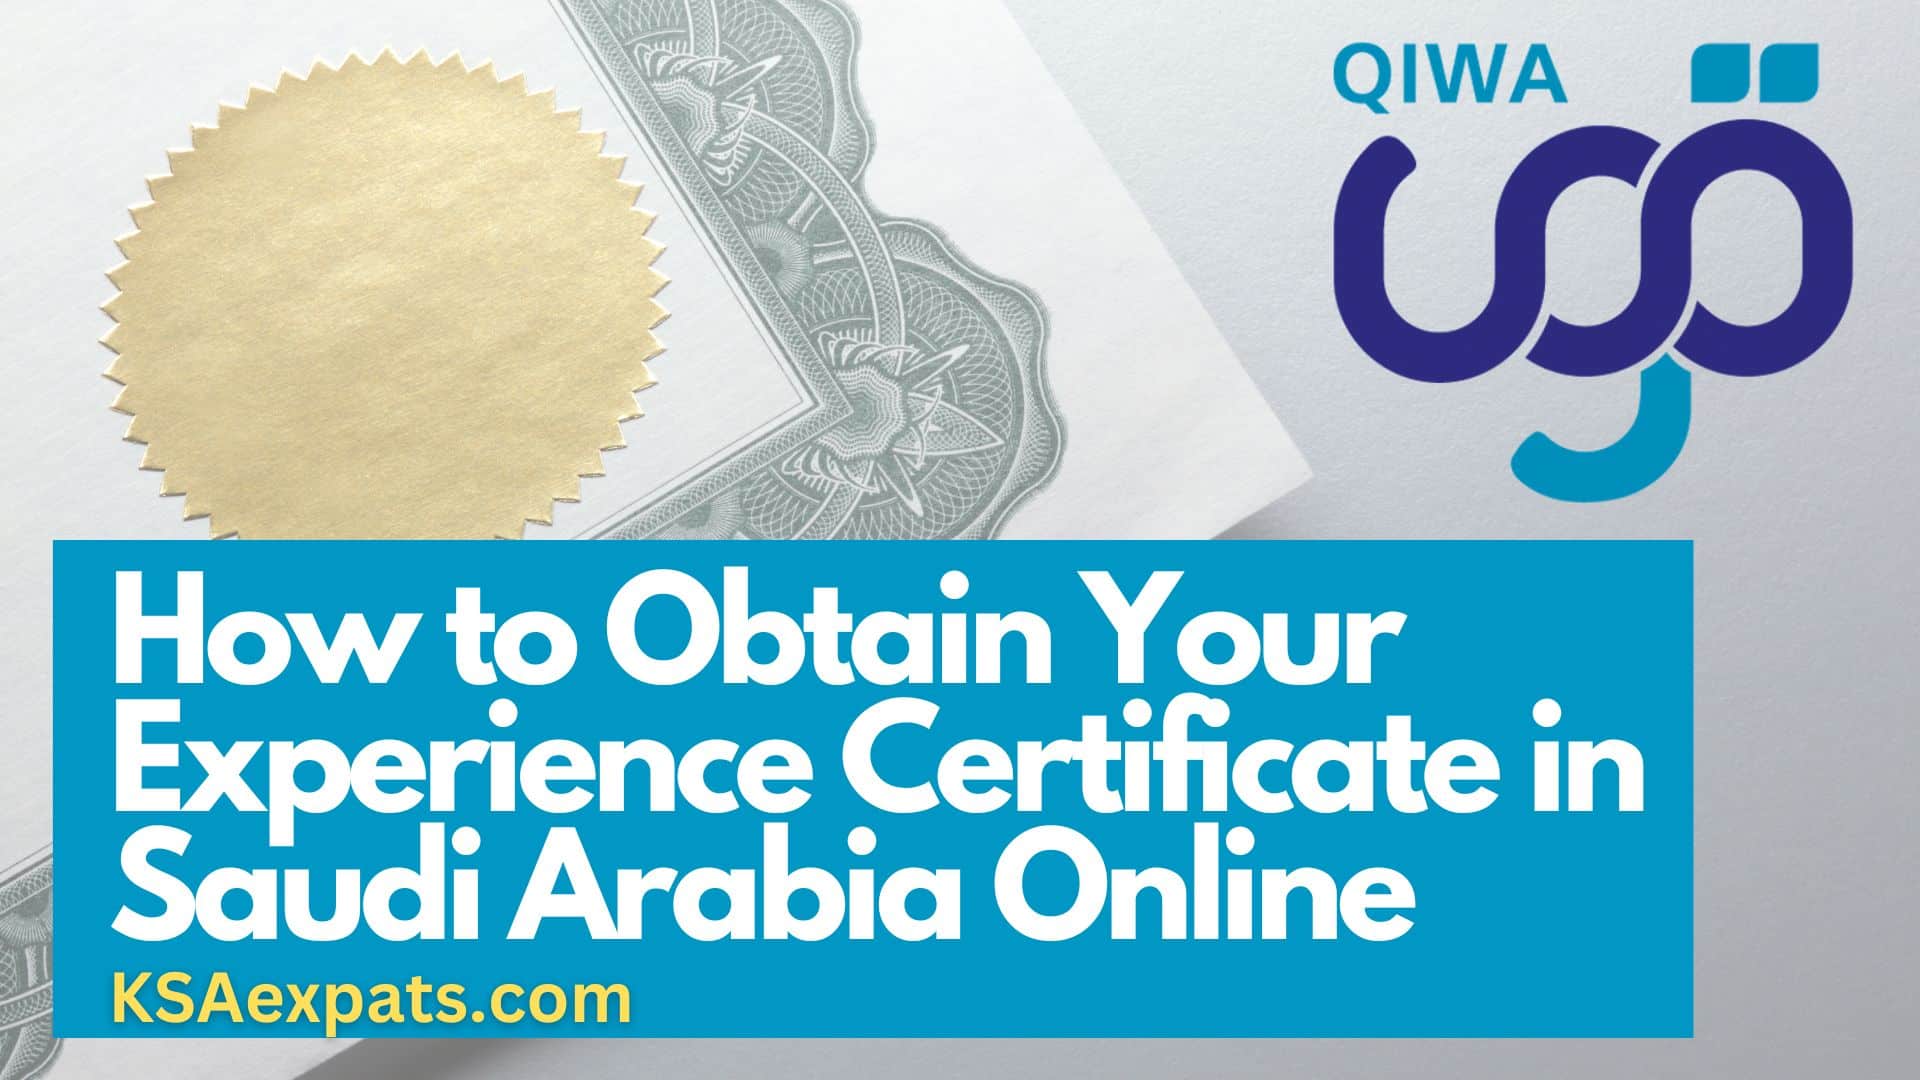 Qiwa experience certificate application, download, view